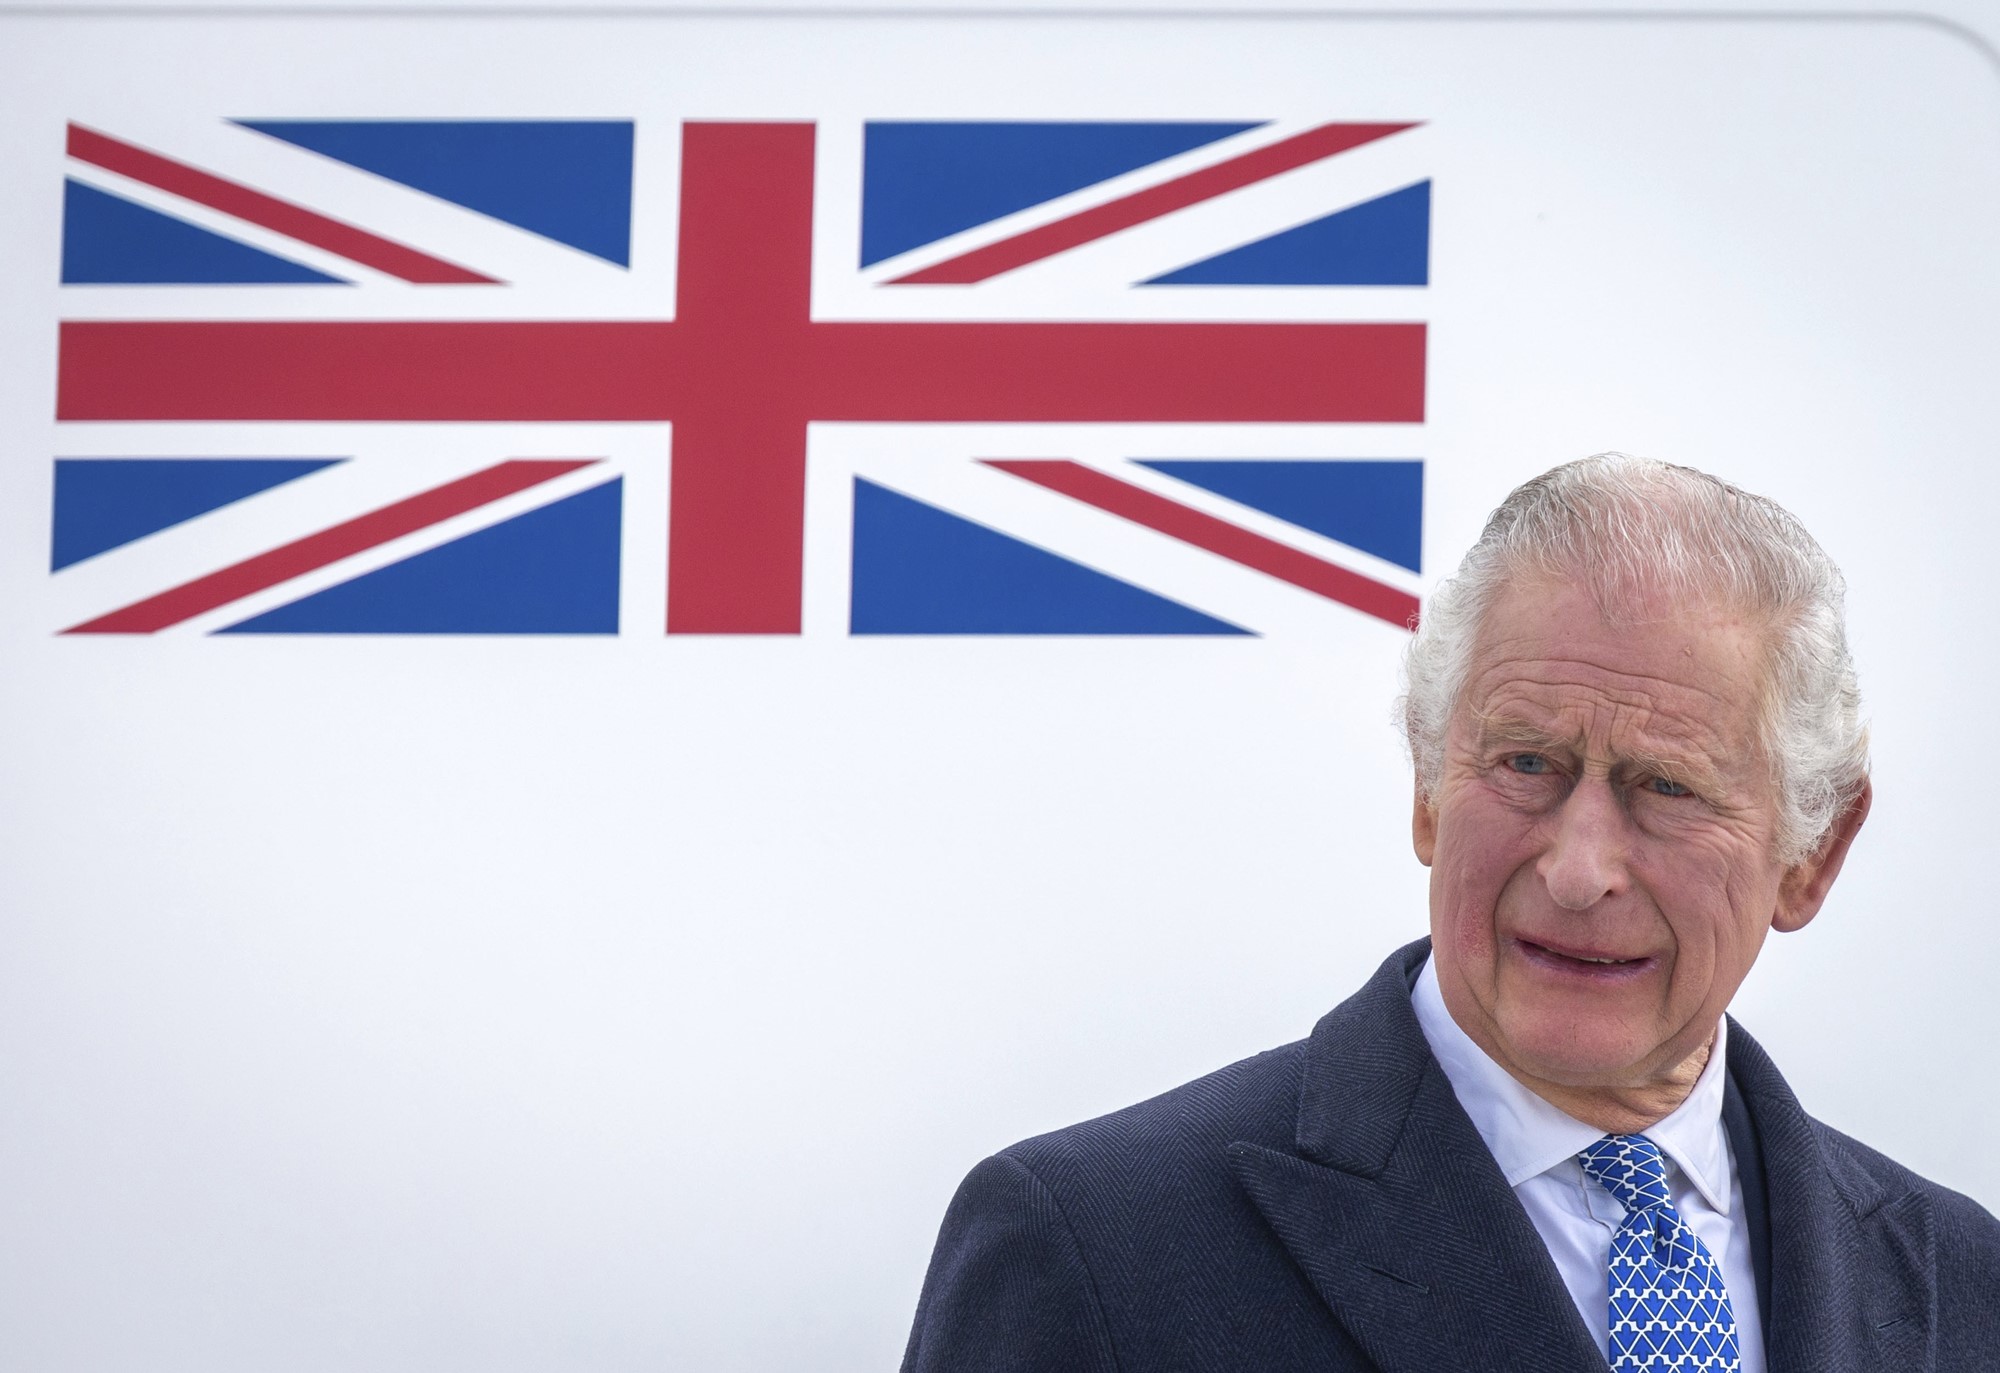 King Charles III stands in front of the Union Jack.